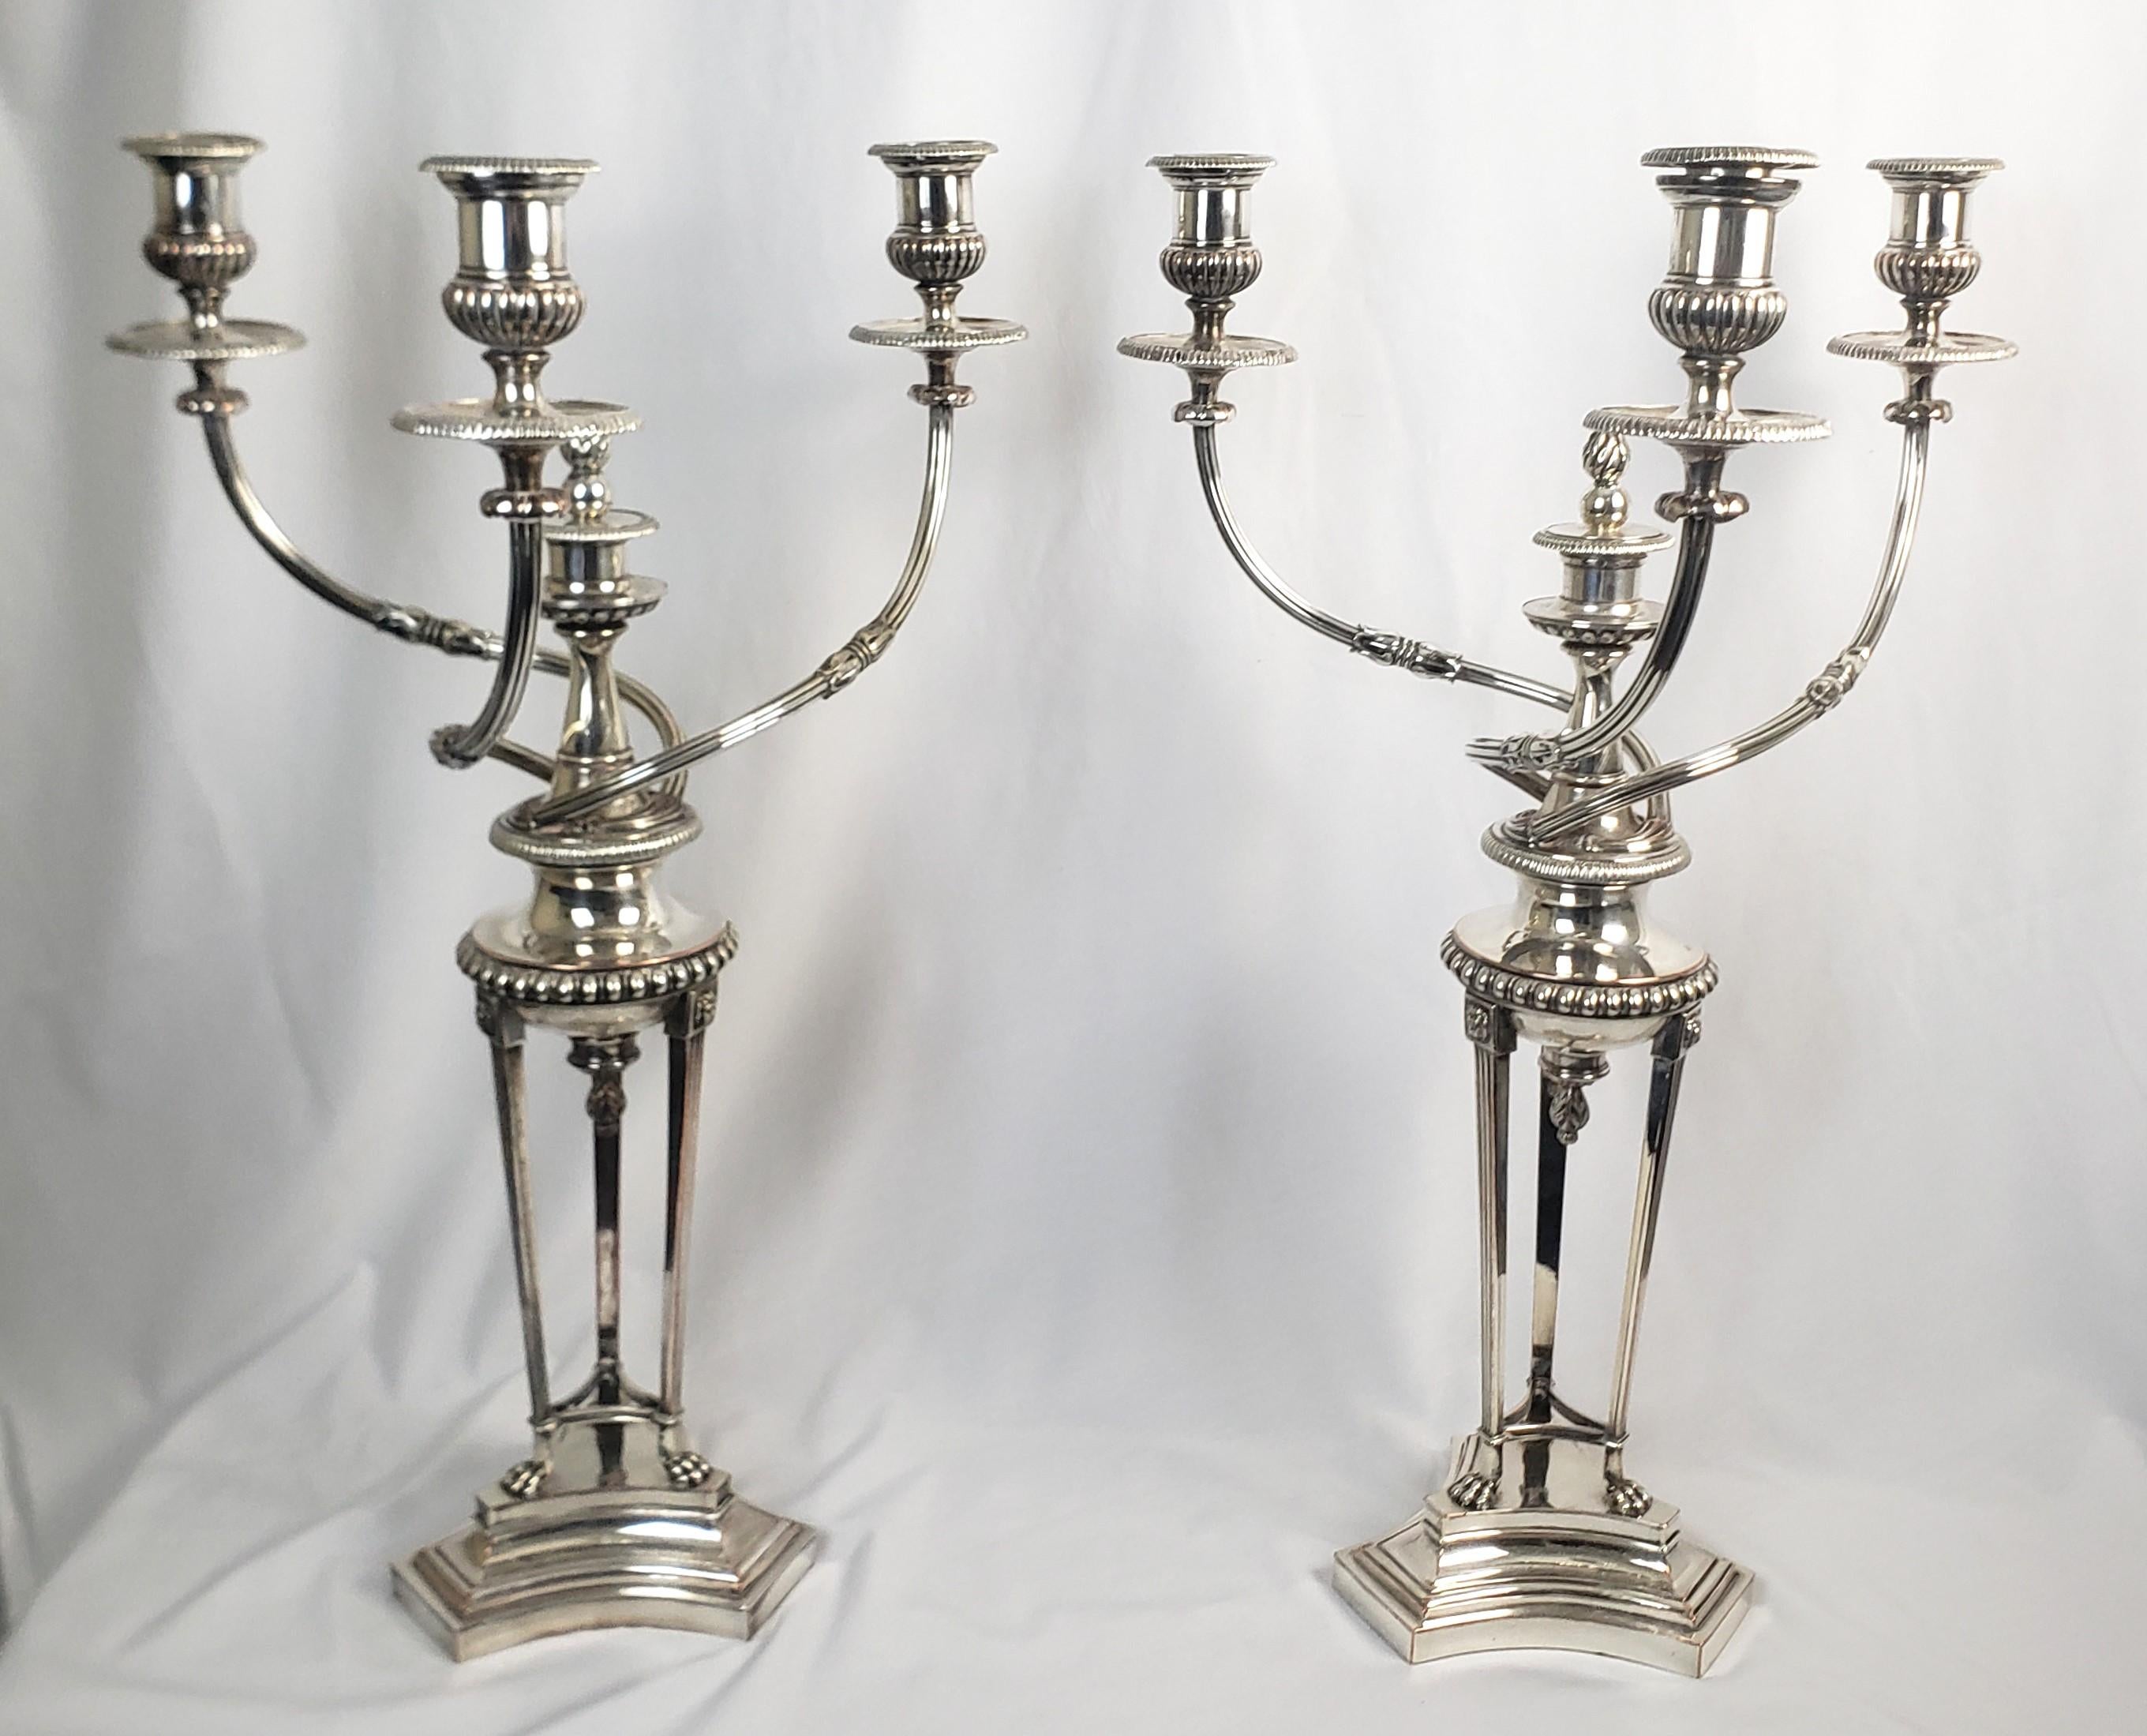 This pair of large and substantial silver plated candelabras were made by the renowned Matthew Boulton on England in apprximately 1810 and done in a period Regency style. The pair are both clearly marked with the Boulton twin suns hallmark on the